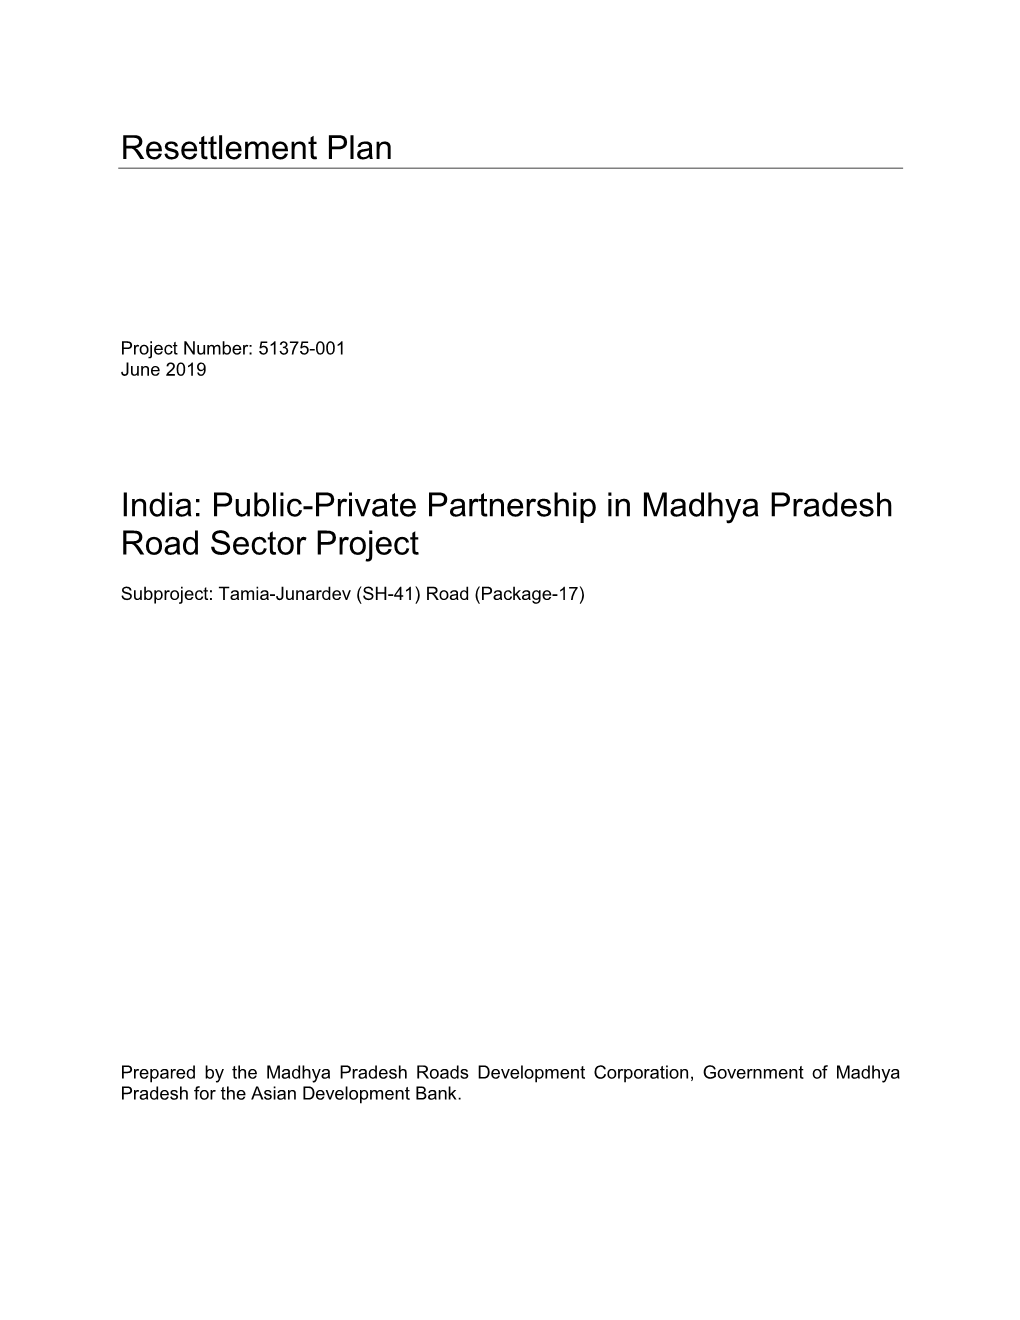 Resettlement Plan India: Public-Private Partnership in Madhya Pradesh Road Sector Project